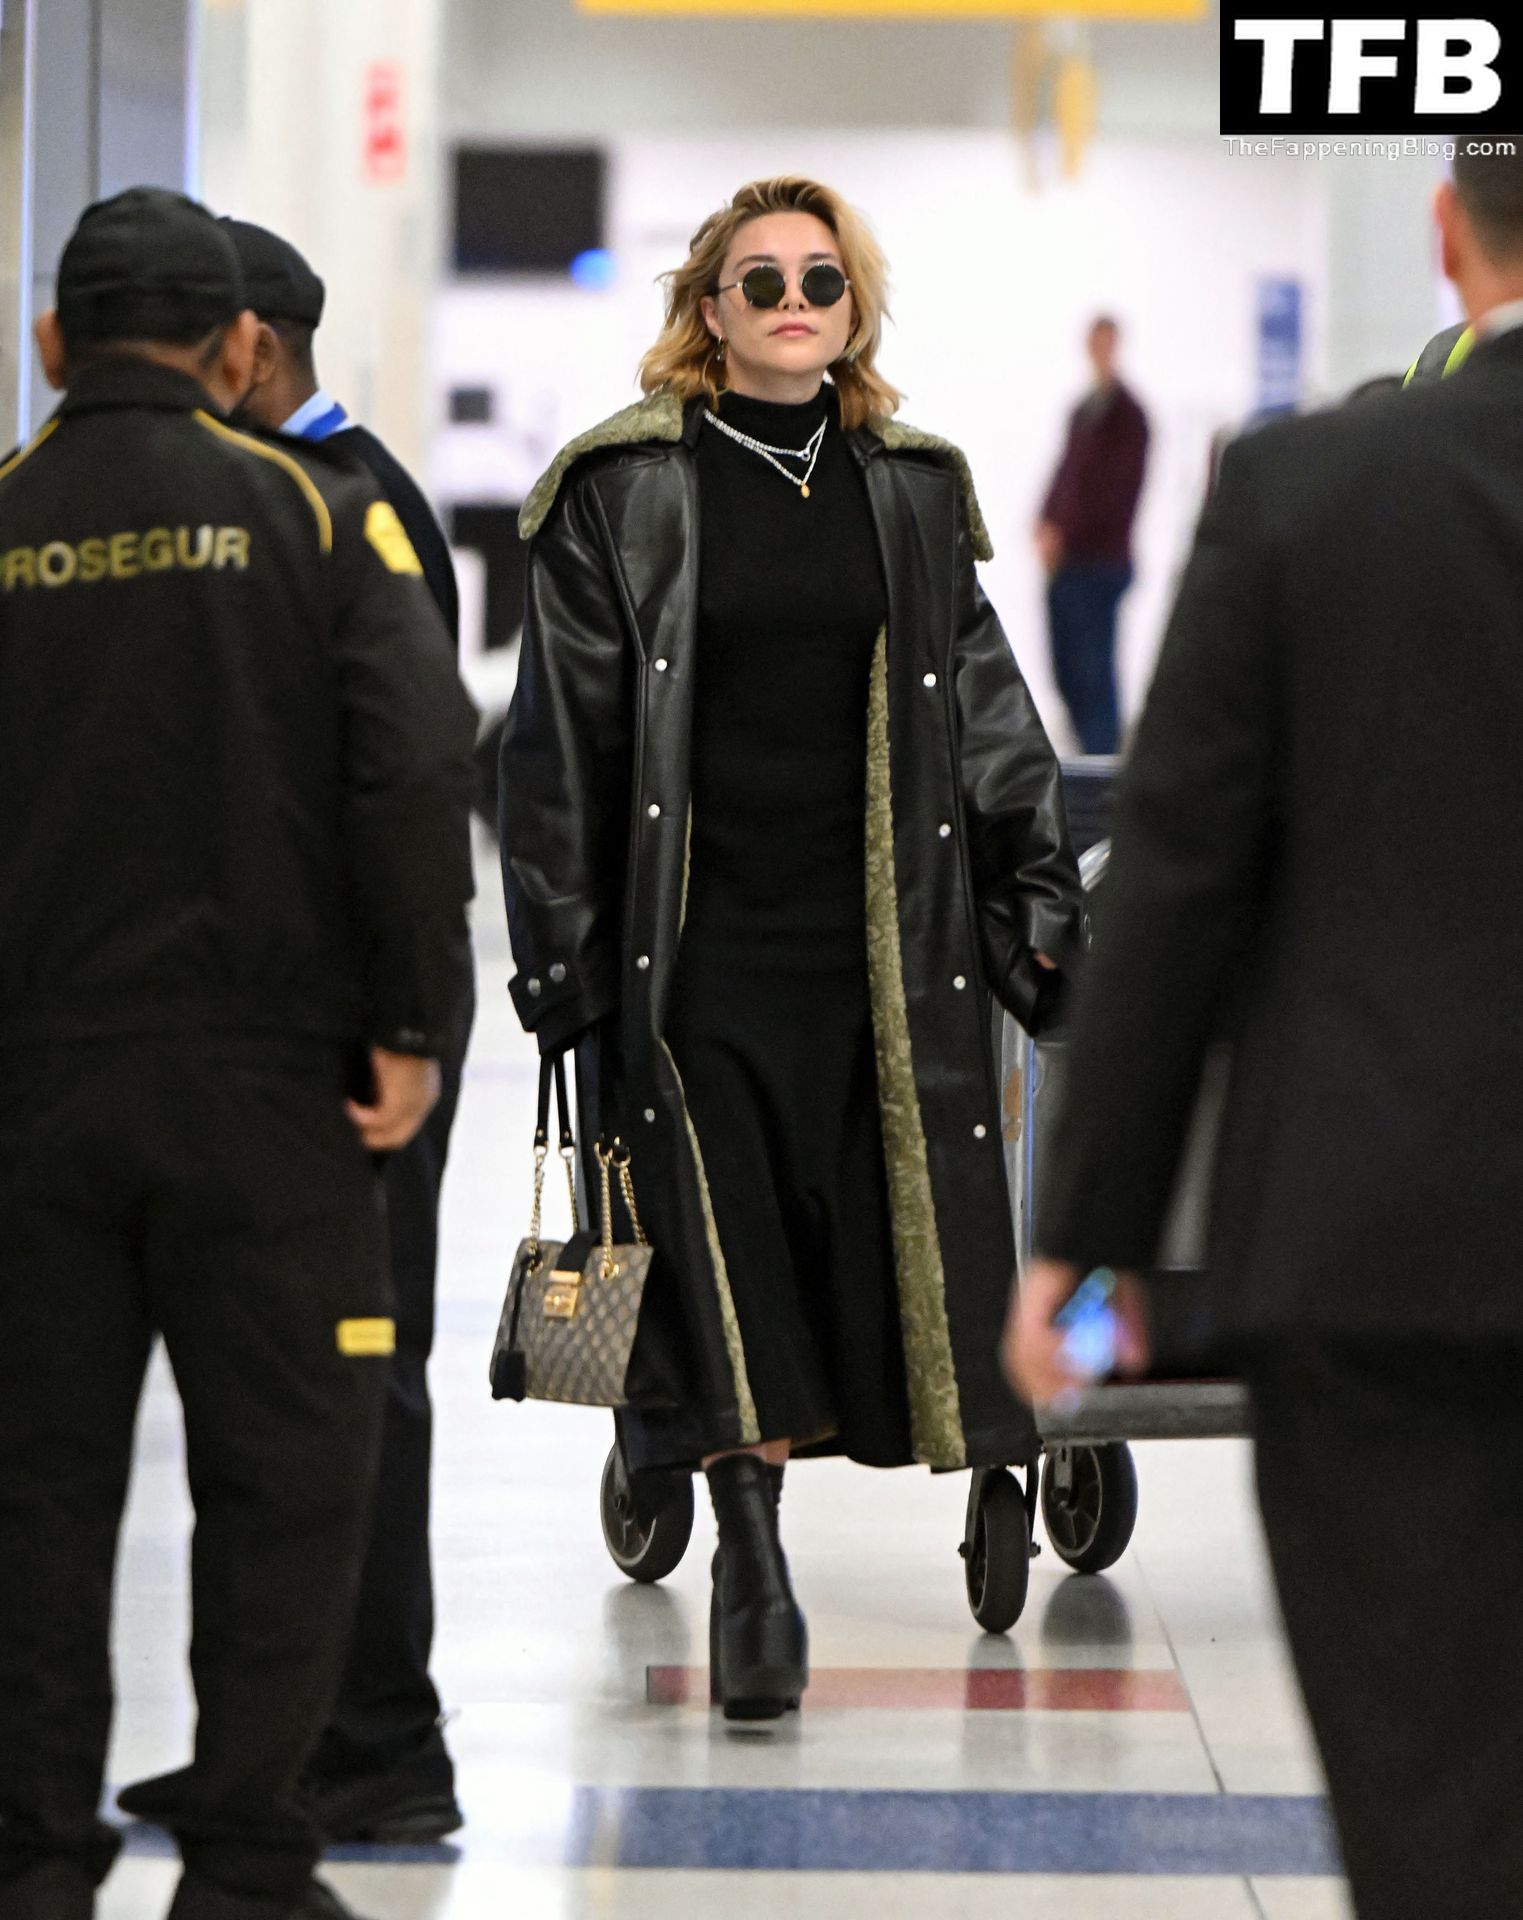 Florence Pugh Pokies The Fappening Blog 15 - Florence Pugh Shows Off Her Pokies at JFK airport in NYC (31 Photos)